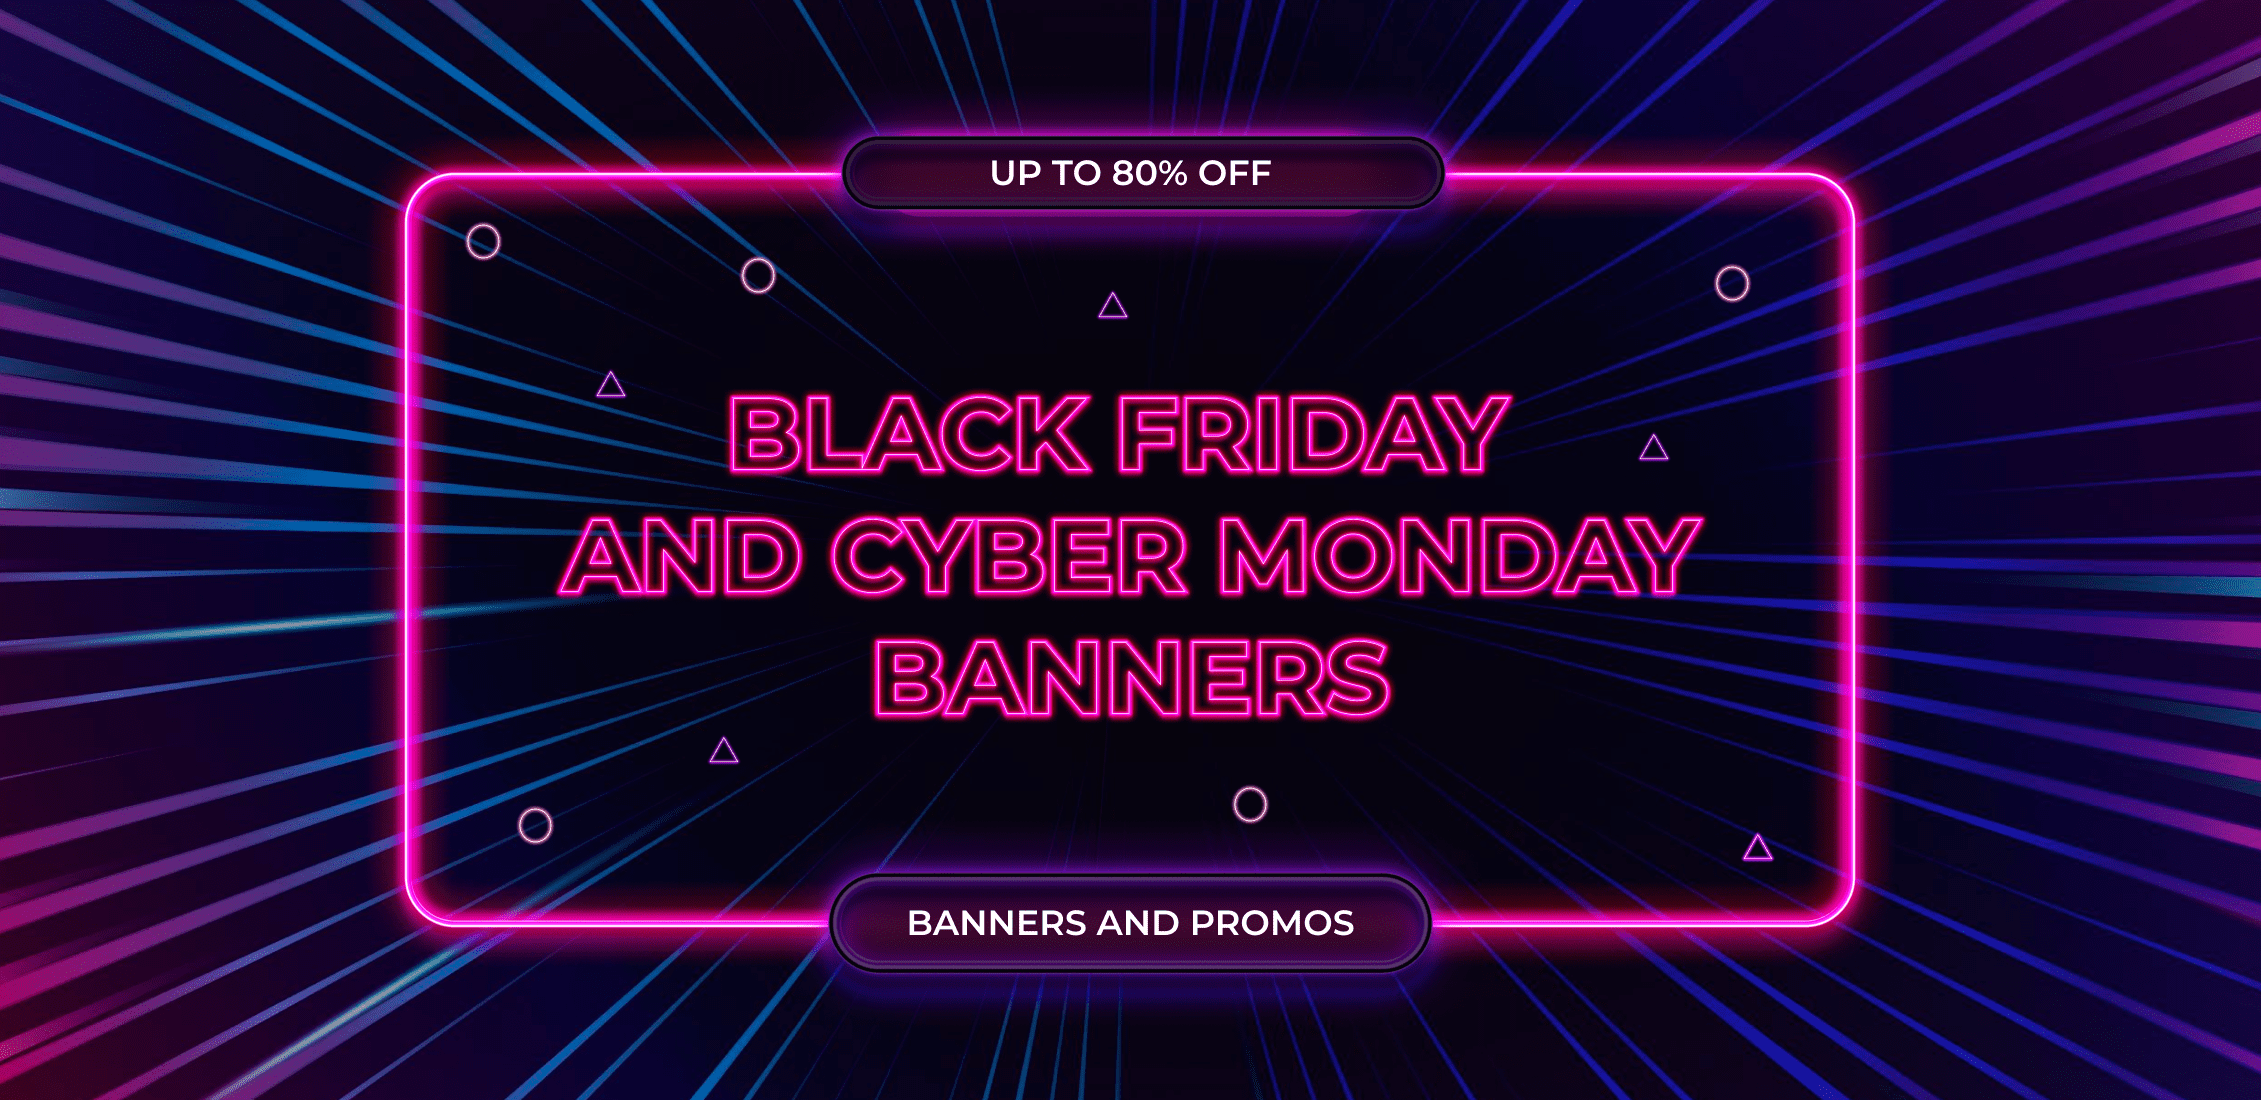 Black Friday And Cyber Monday Banners And Promo2